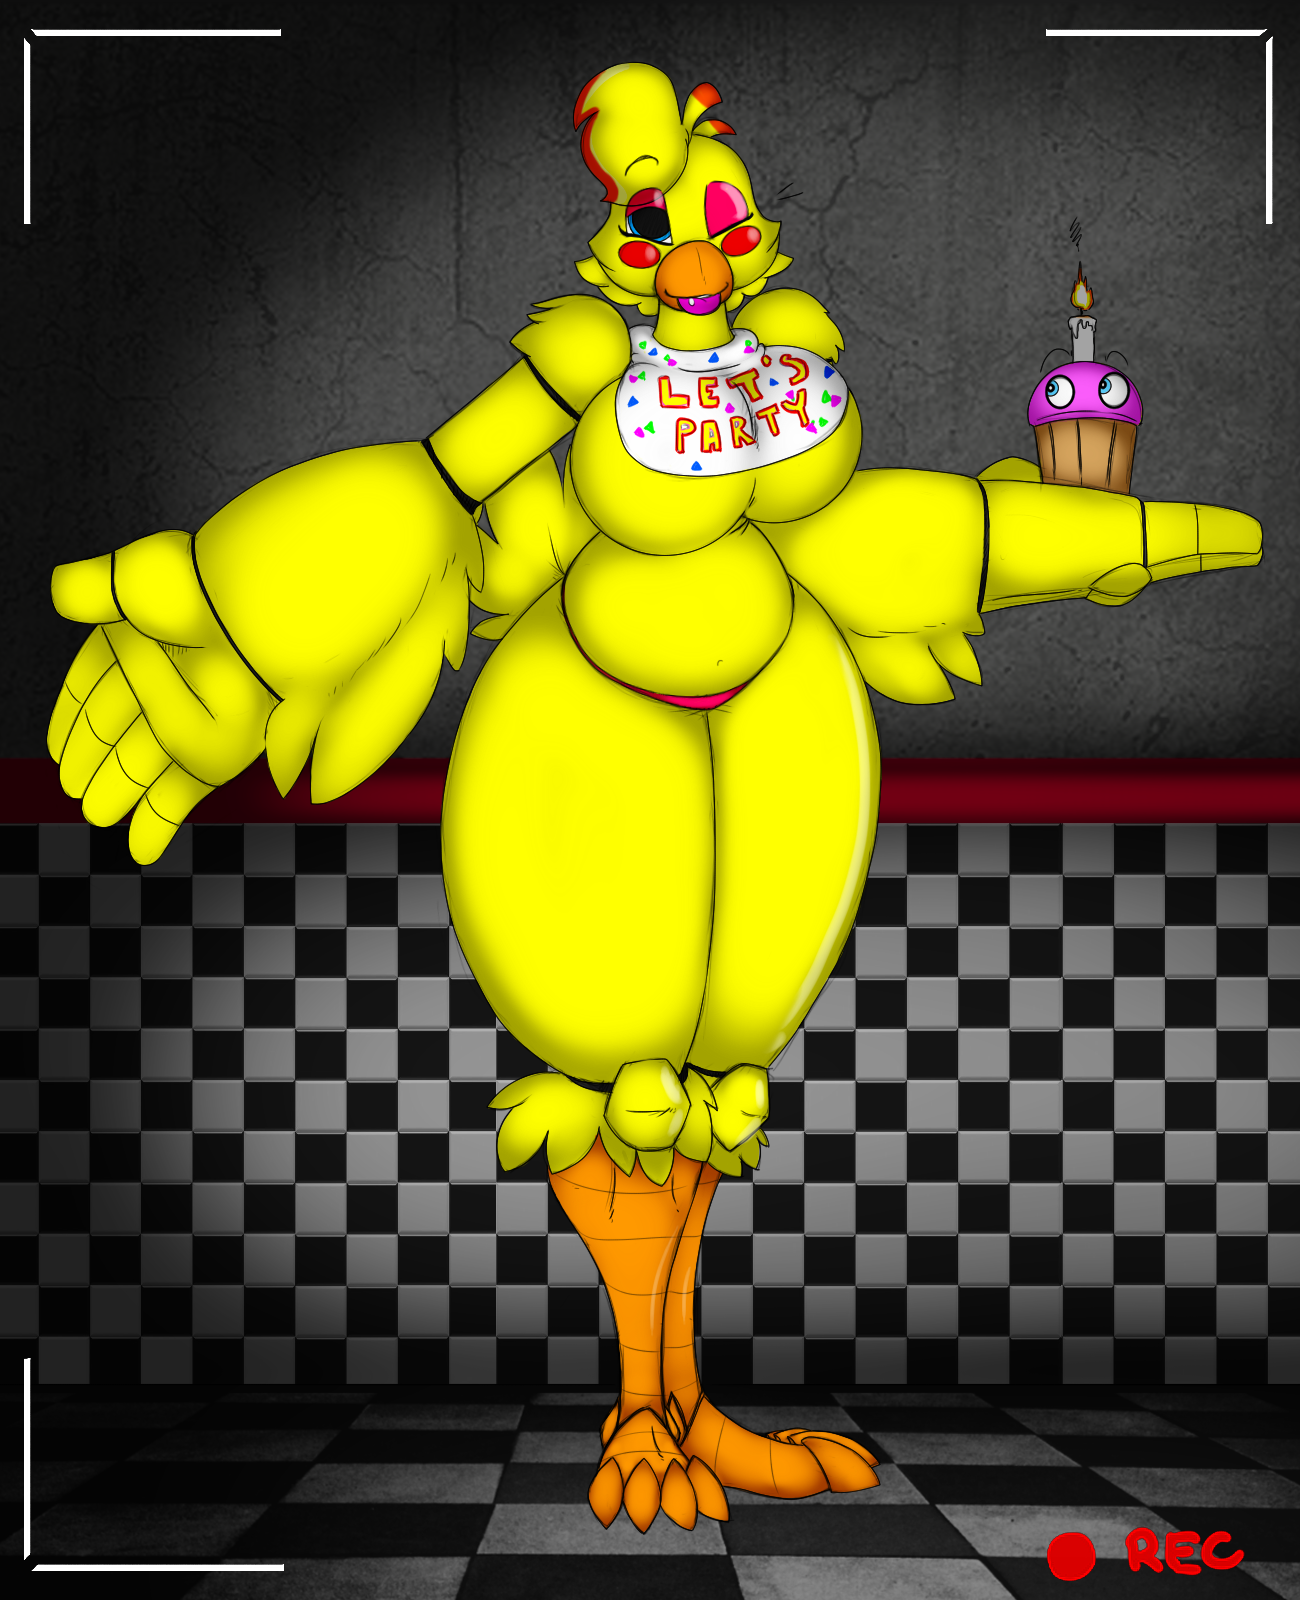 Fnaf toy chica big tits Seeing Toy Chica By Heartman98 On Deviantart